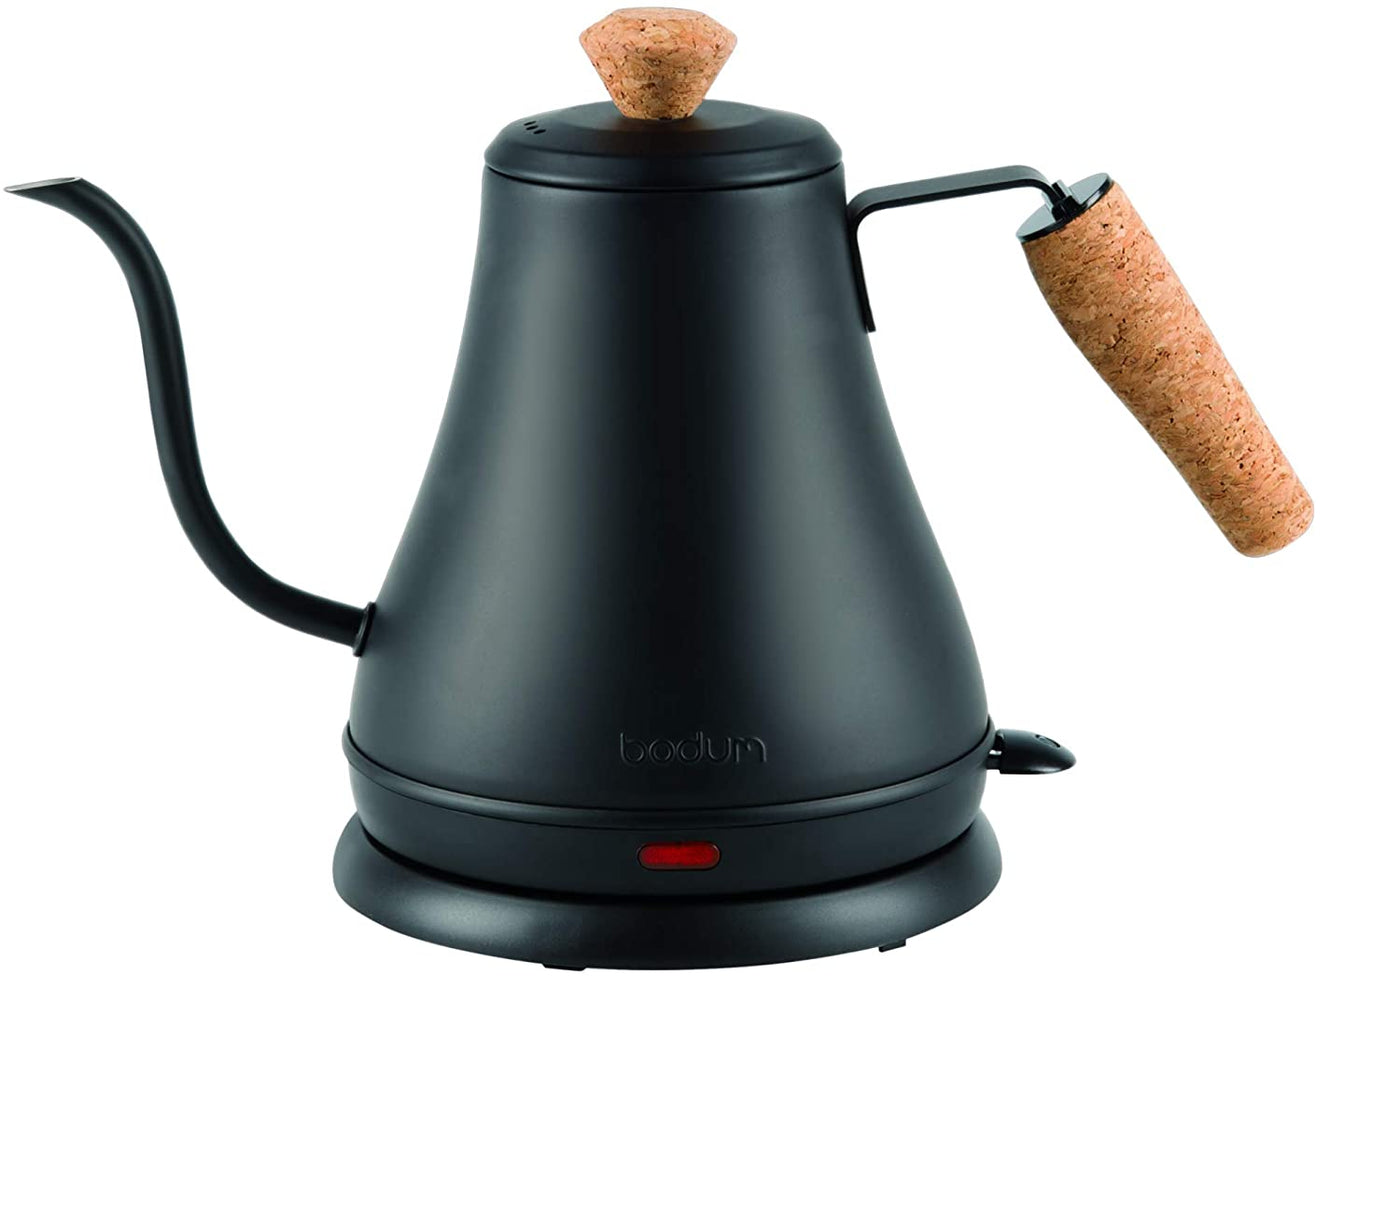 Review Speed-Boil Electric Kettle For Coffee & Tea - An